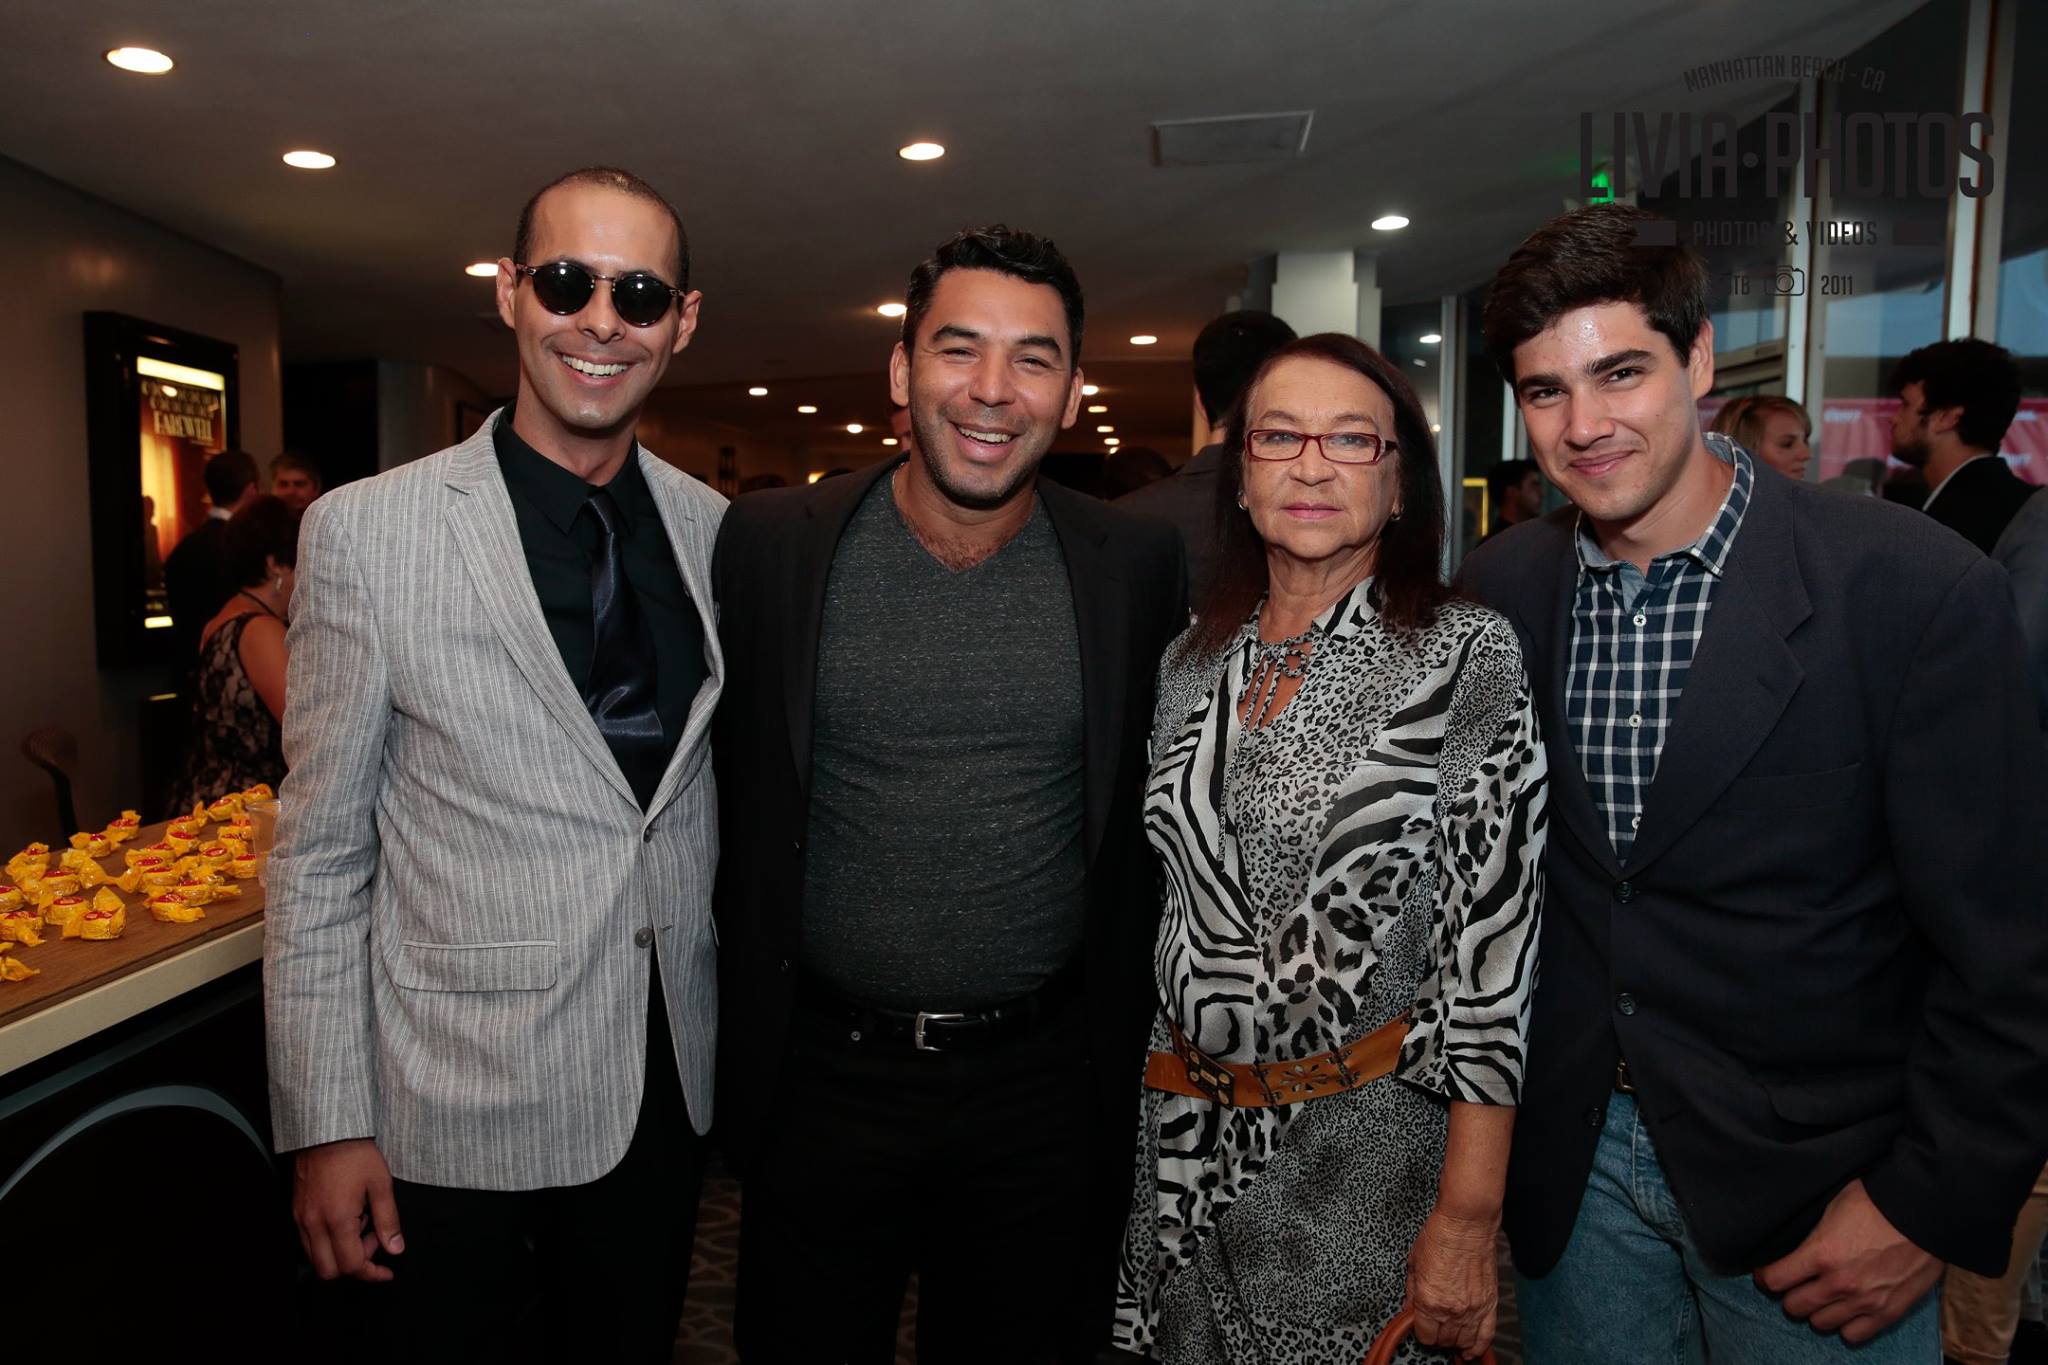 With Eric Marinho and others at Los Angeles Brazilian Film Festival, LABRFF 2015.